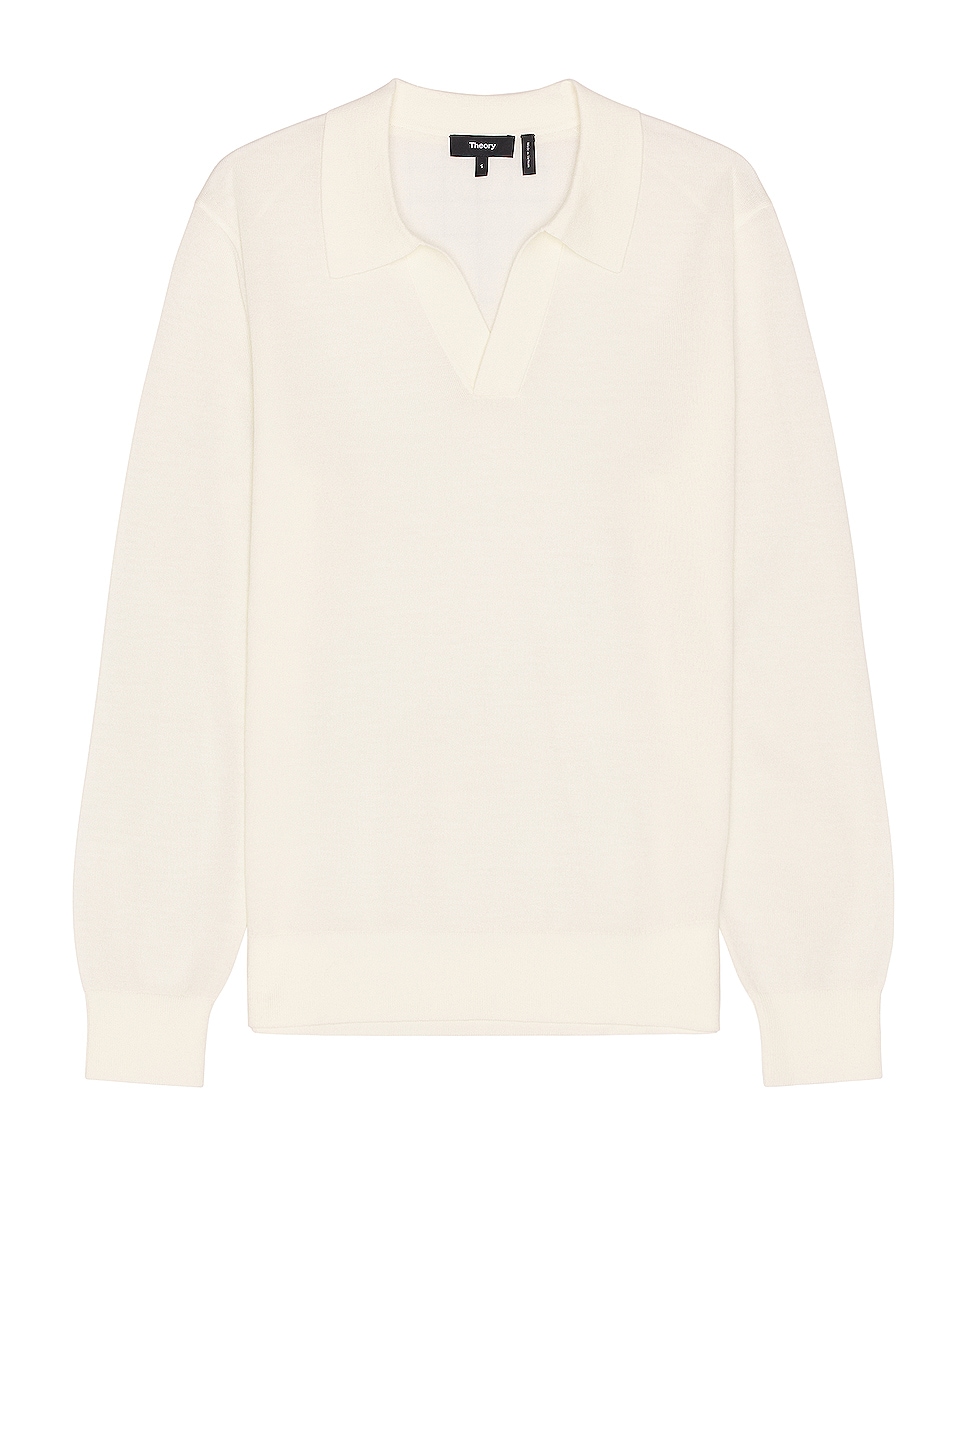 Image 1 of Theory Briody Sweater in Ivory